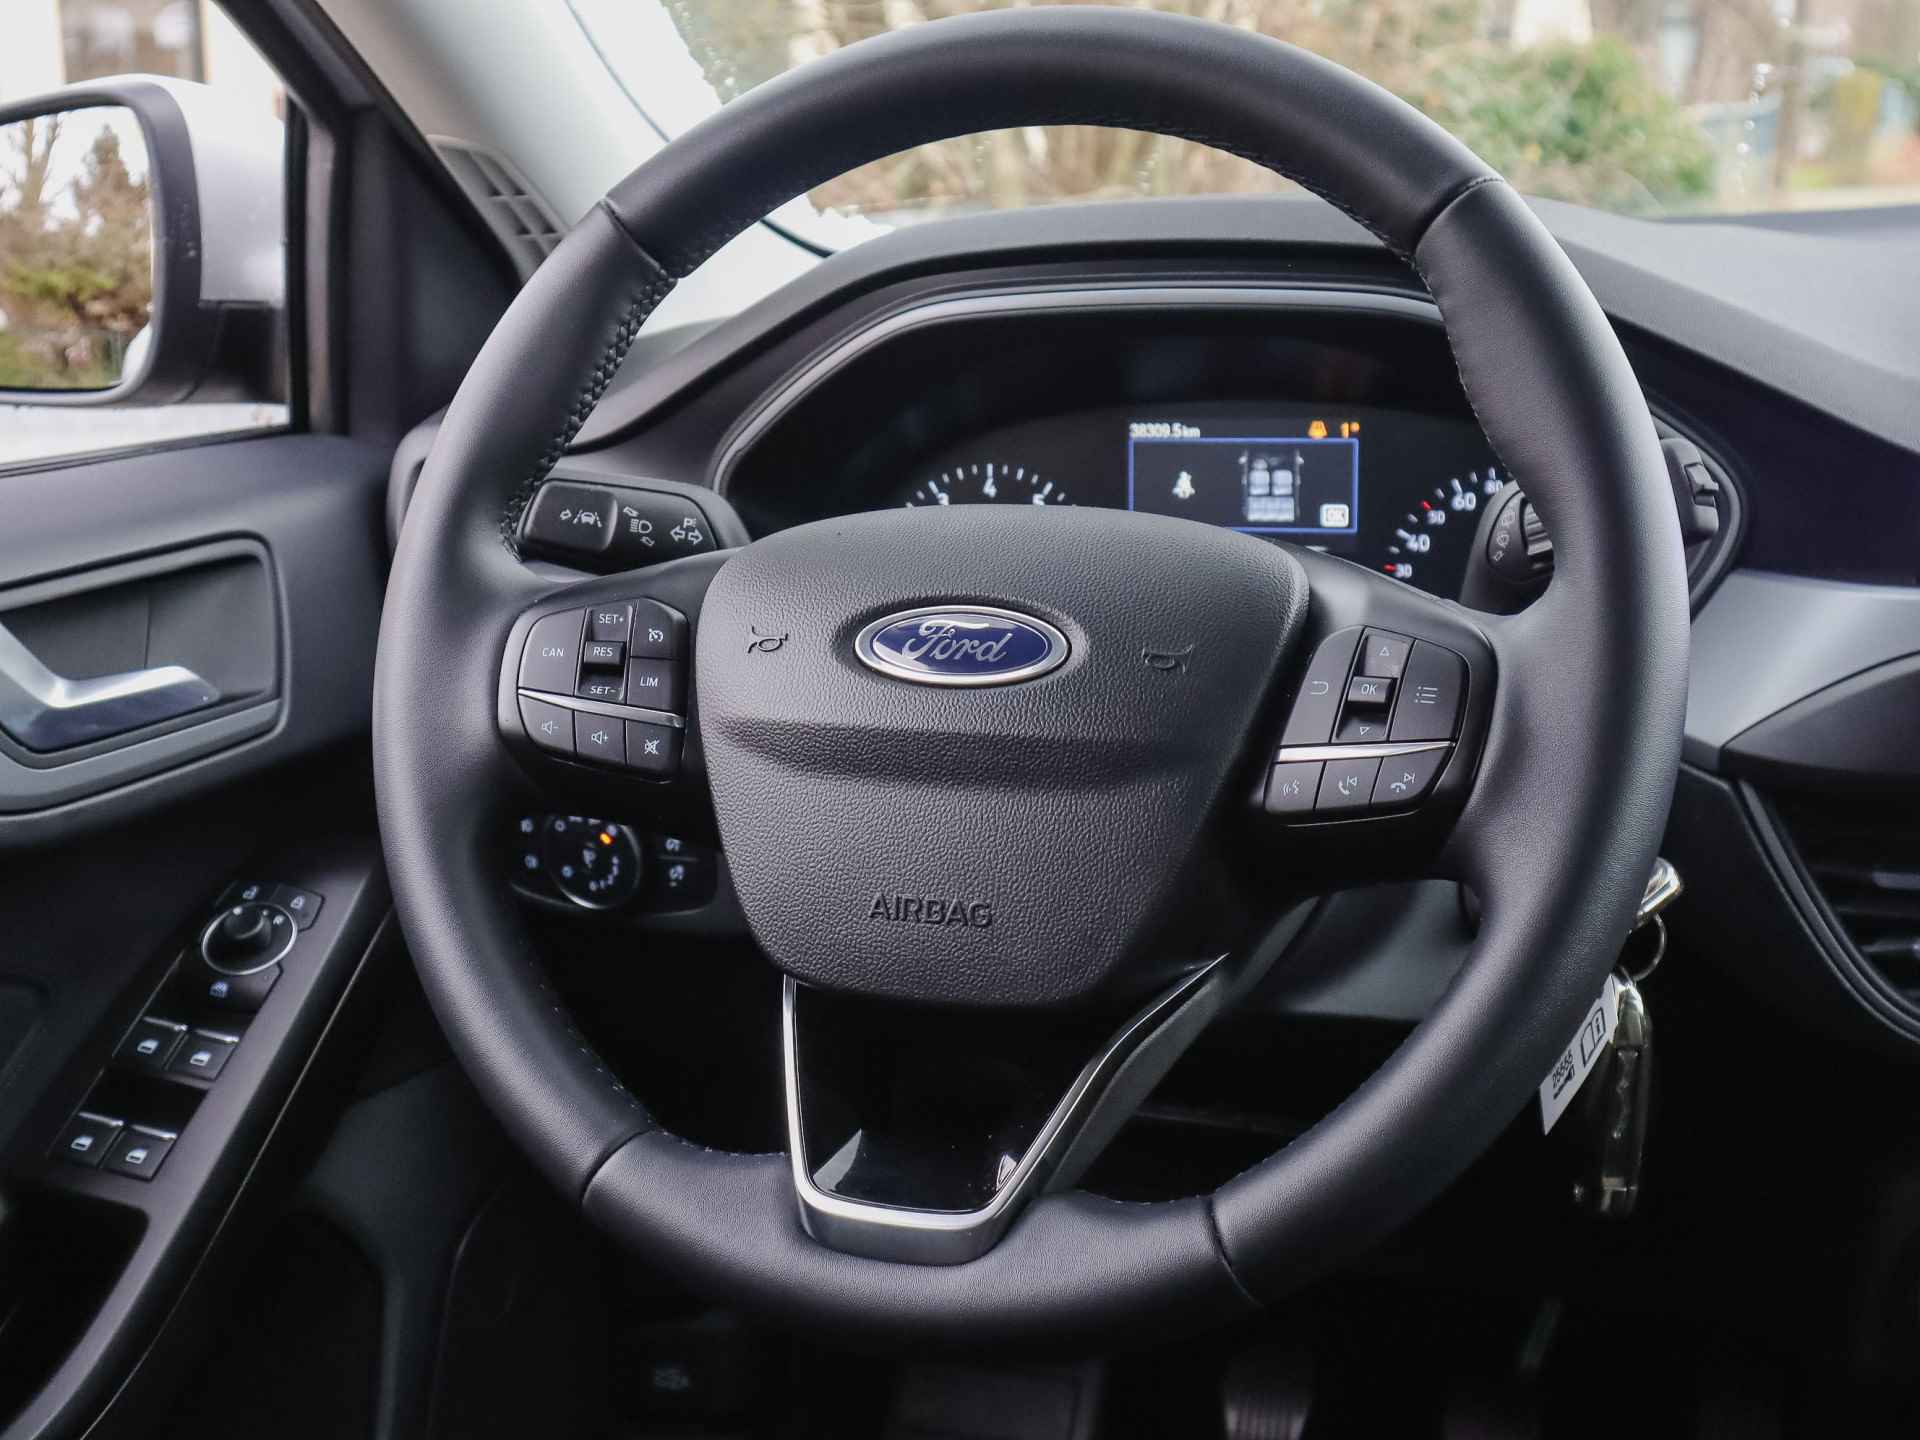 Ford Focus 1.0i Hybrid Connected, (149PK) 1e-Eig, Ford-Dealer-Onderh, 12-Mnd-BOVAG, NL-Auto, Navigatie/Apple-Carplay/Android-Auto, Parkeersensoren-V+A, Cruise-Control, Airco, DAB, Lane-Assist, Privacy-Glas, Sportstoelen, Led-Koplampen, Adaptieve-Cruise-Control - 12/55